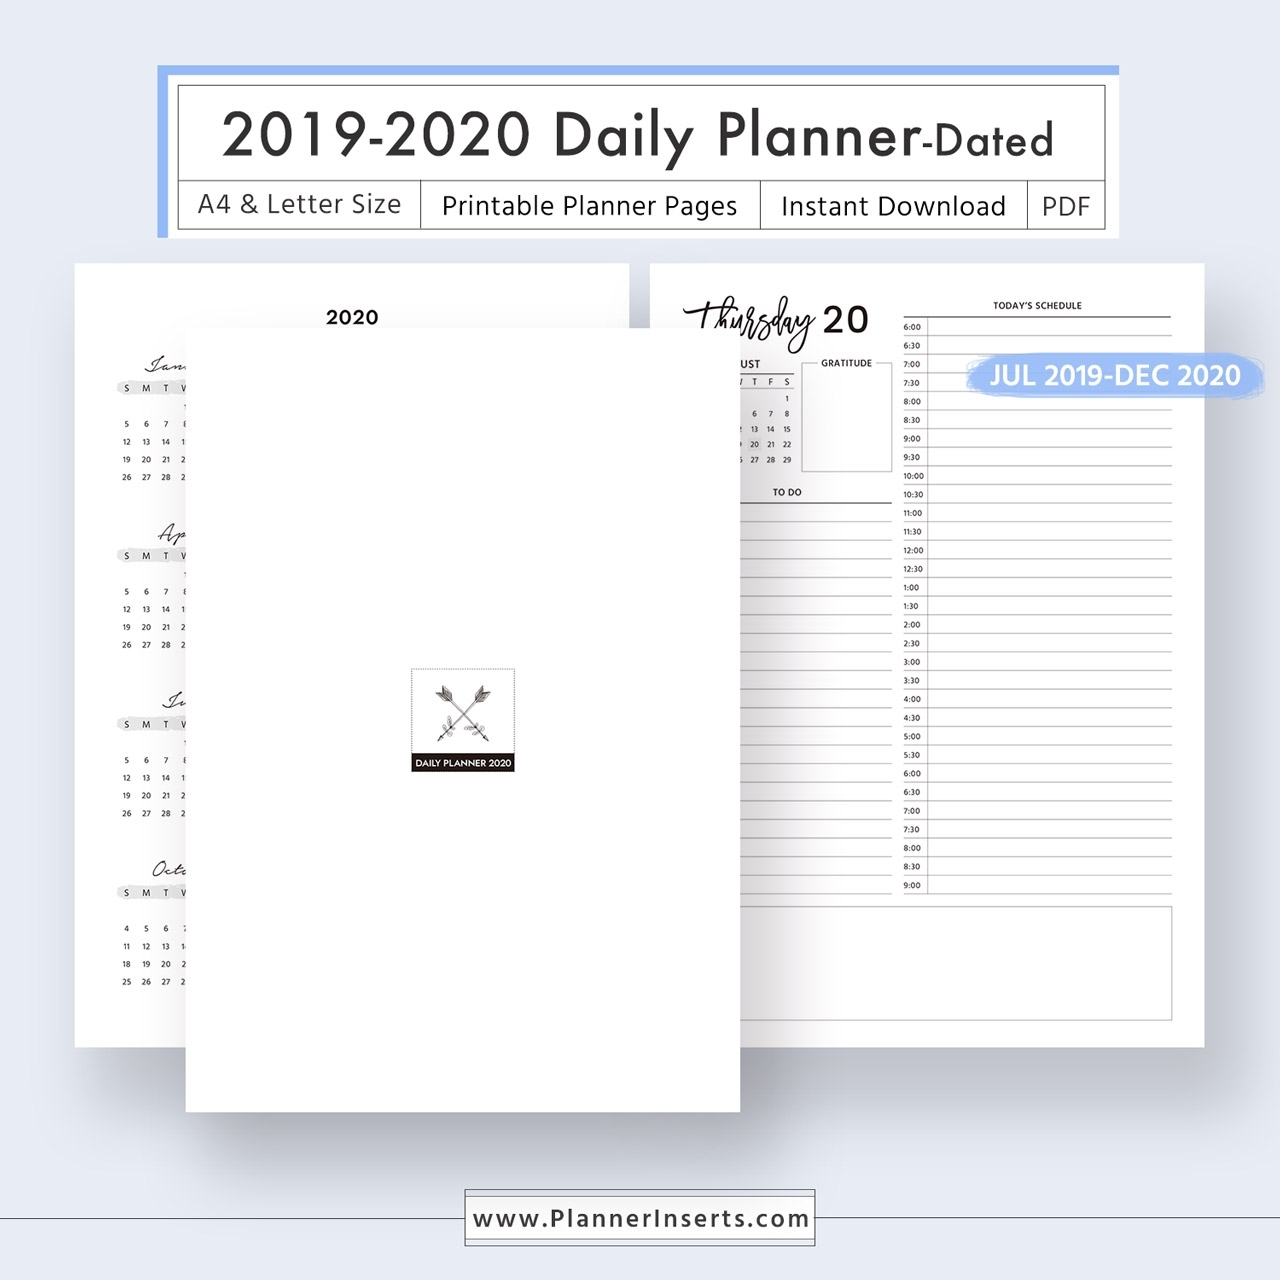 2021 Dated Daily Planner Template For Instant Download